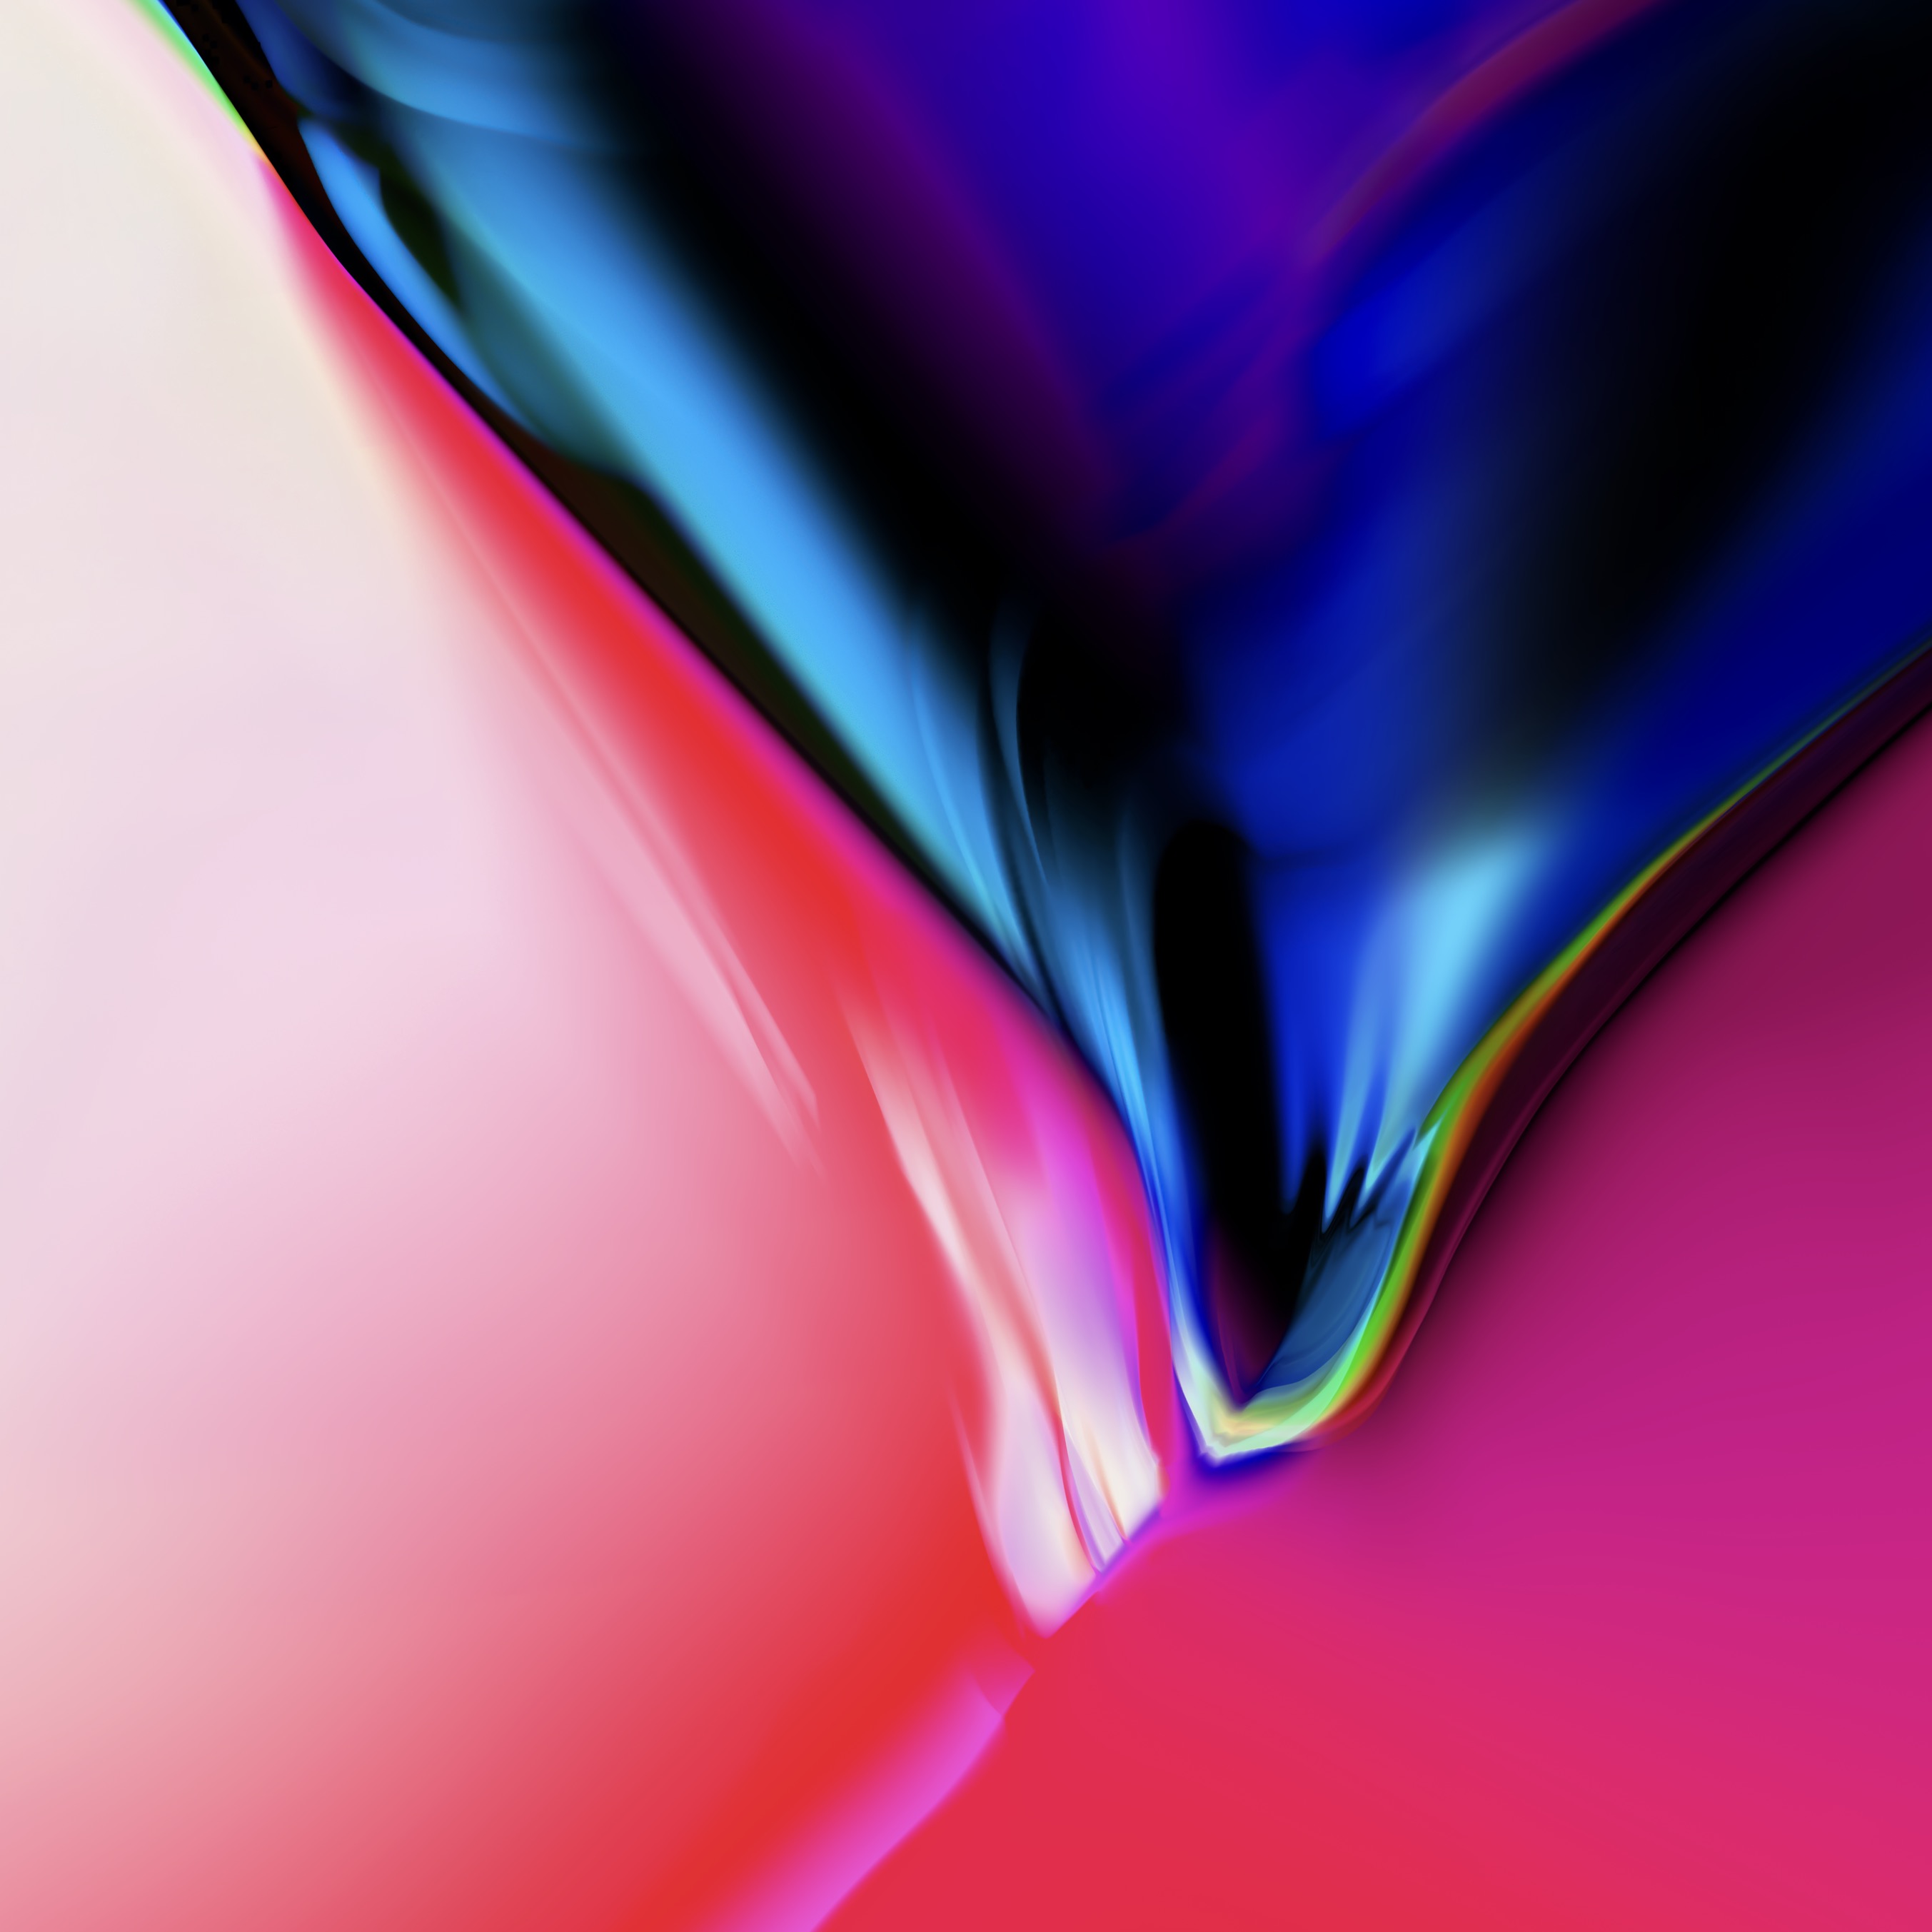 iOS 11 Wallpapers